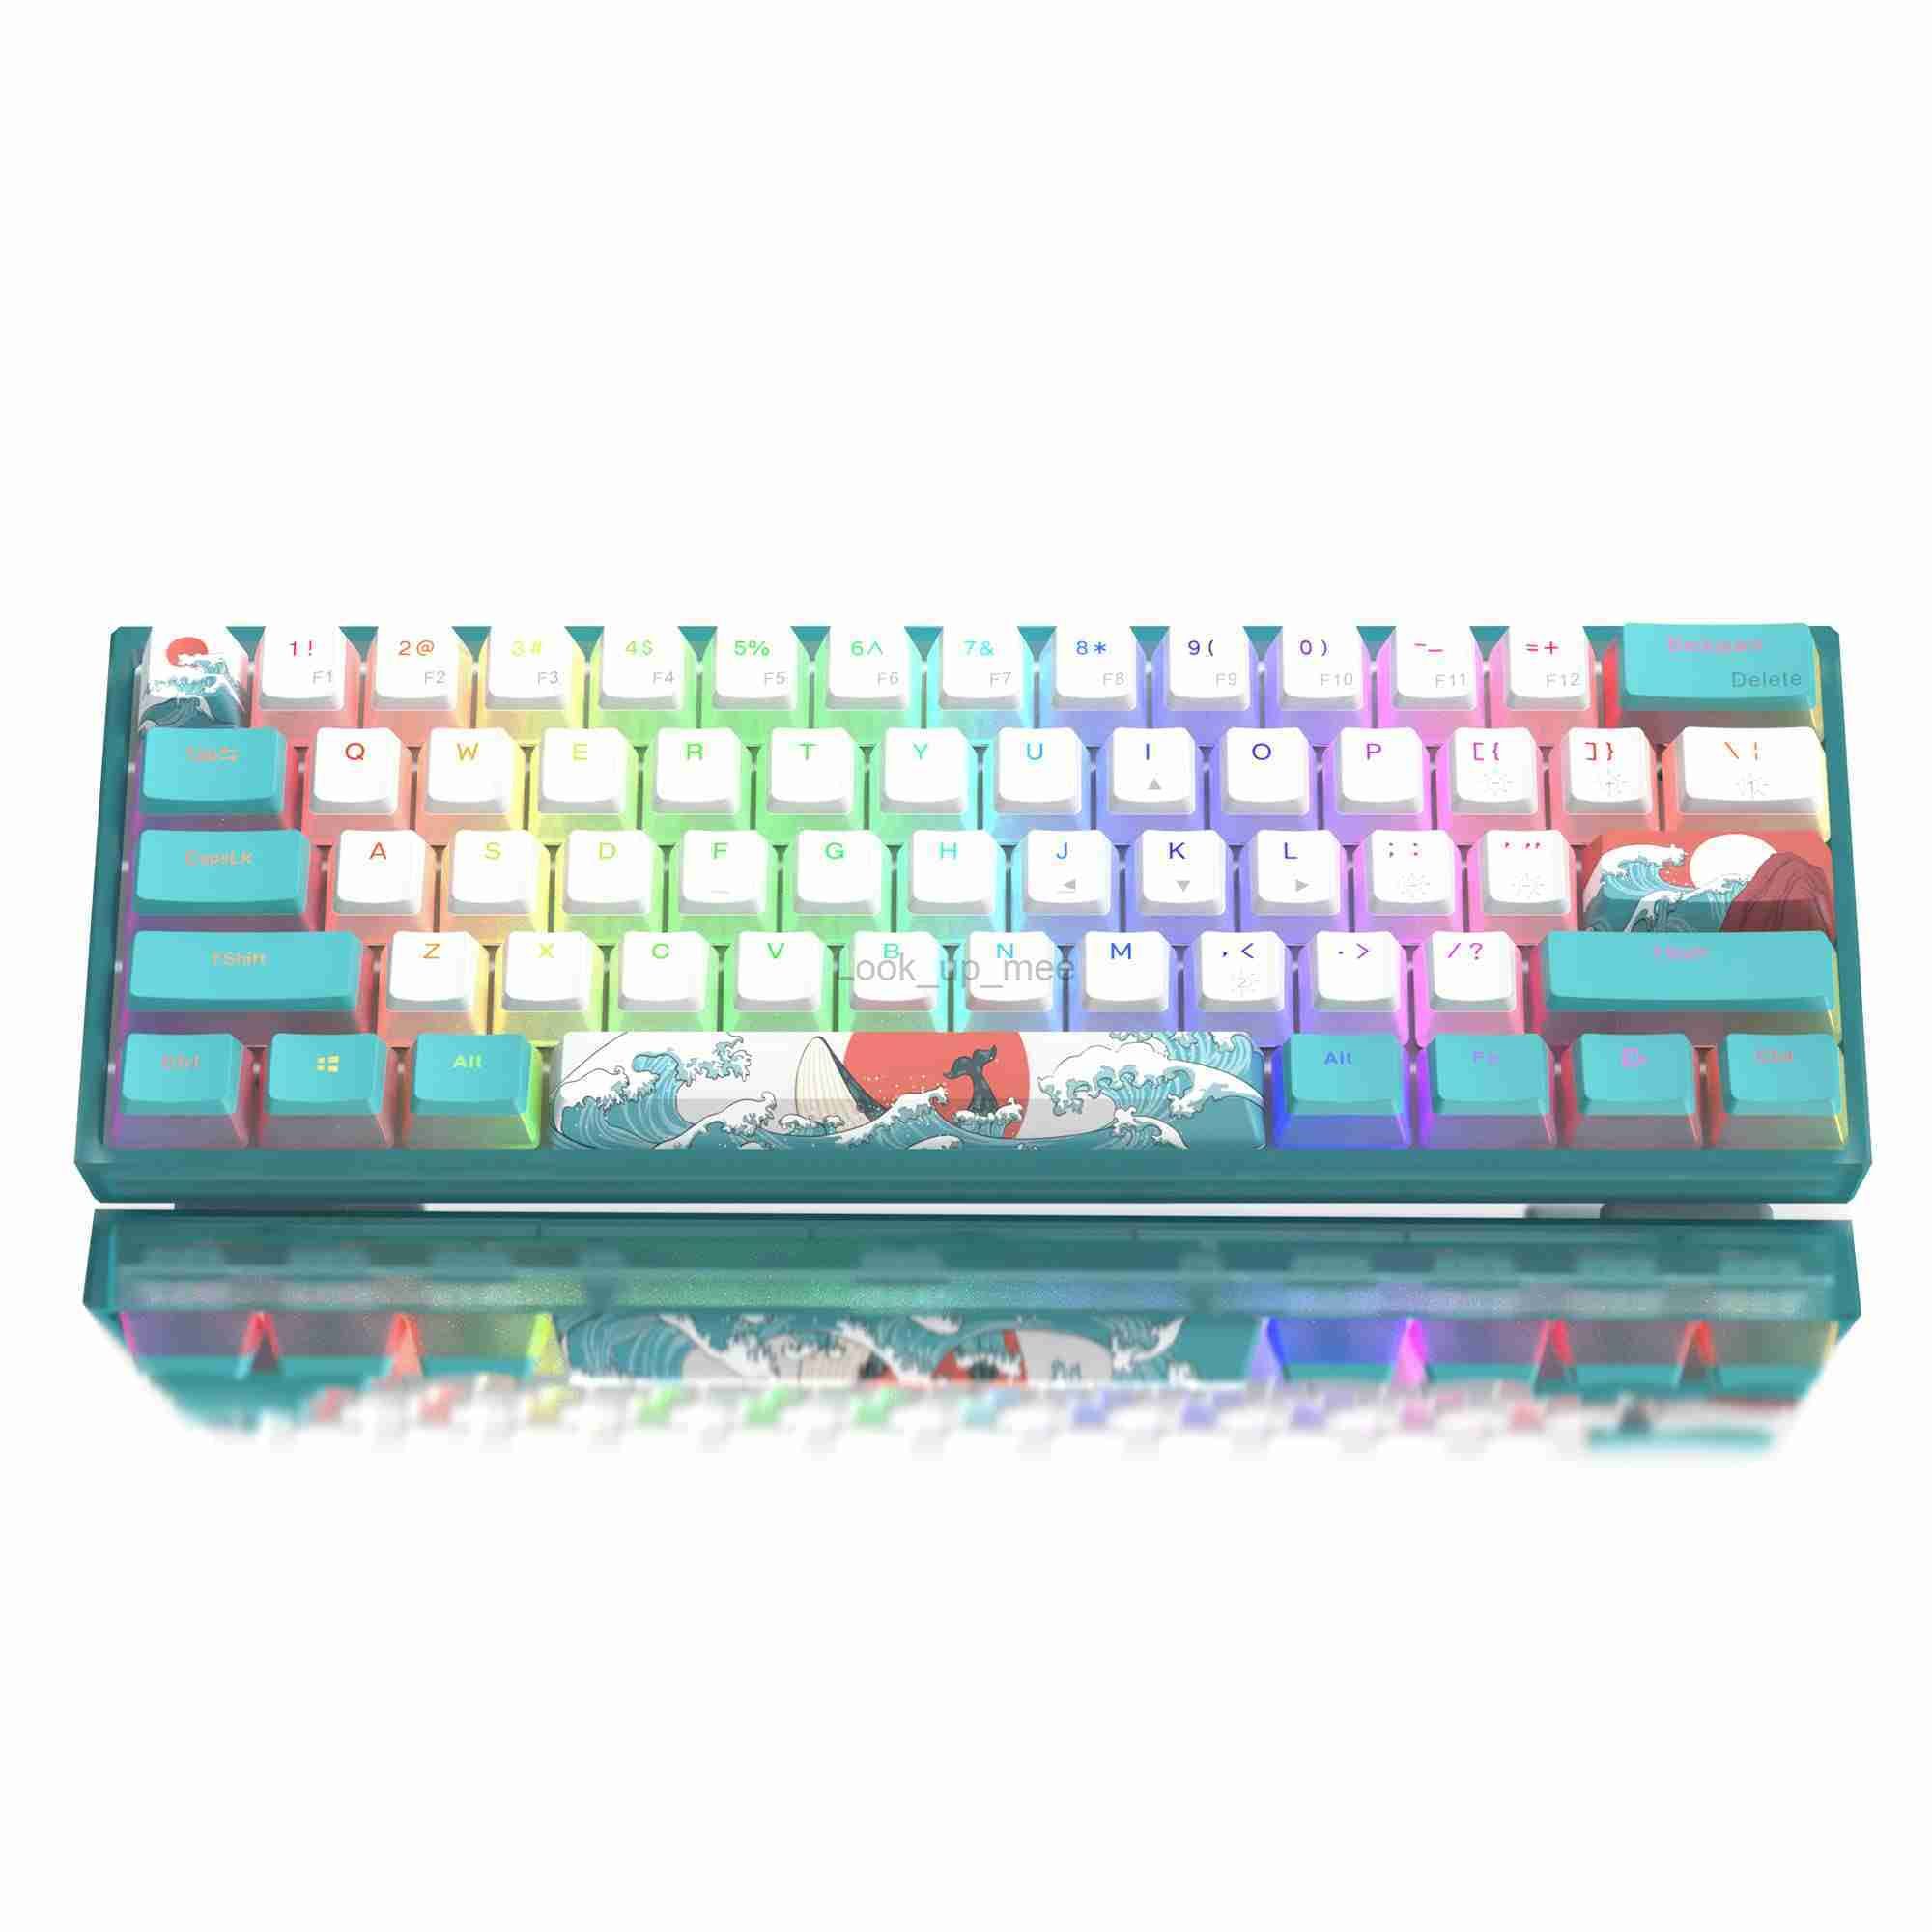 Mechanical RGB Wired Gaming Keyboard with Number Pad PBT Keycaps